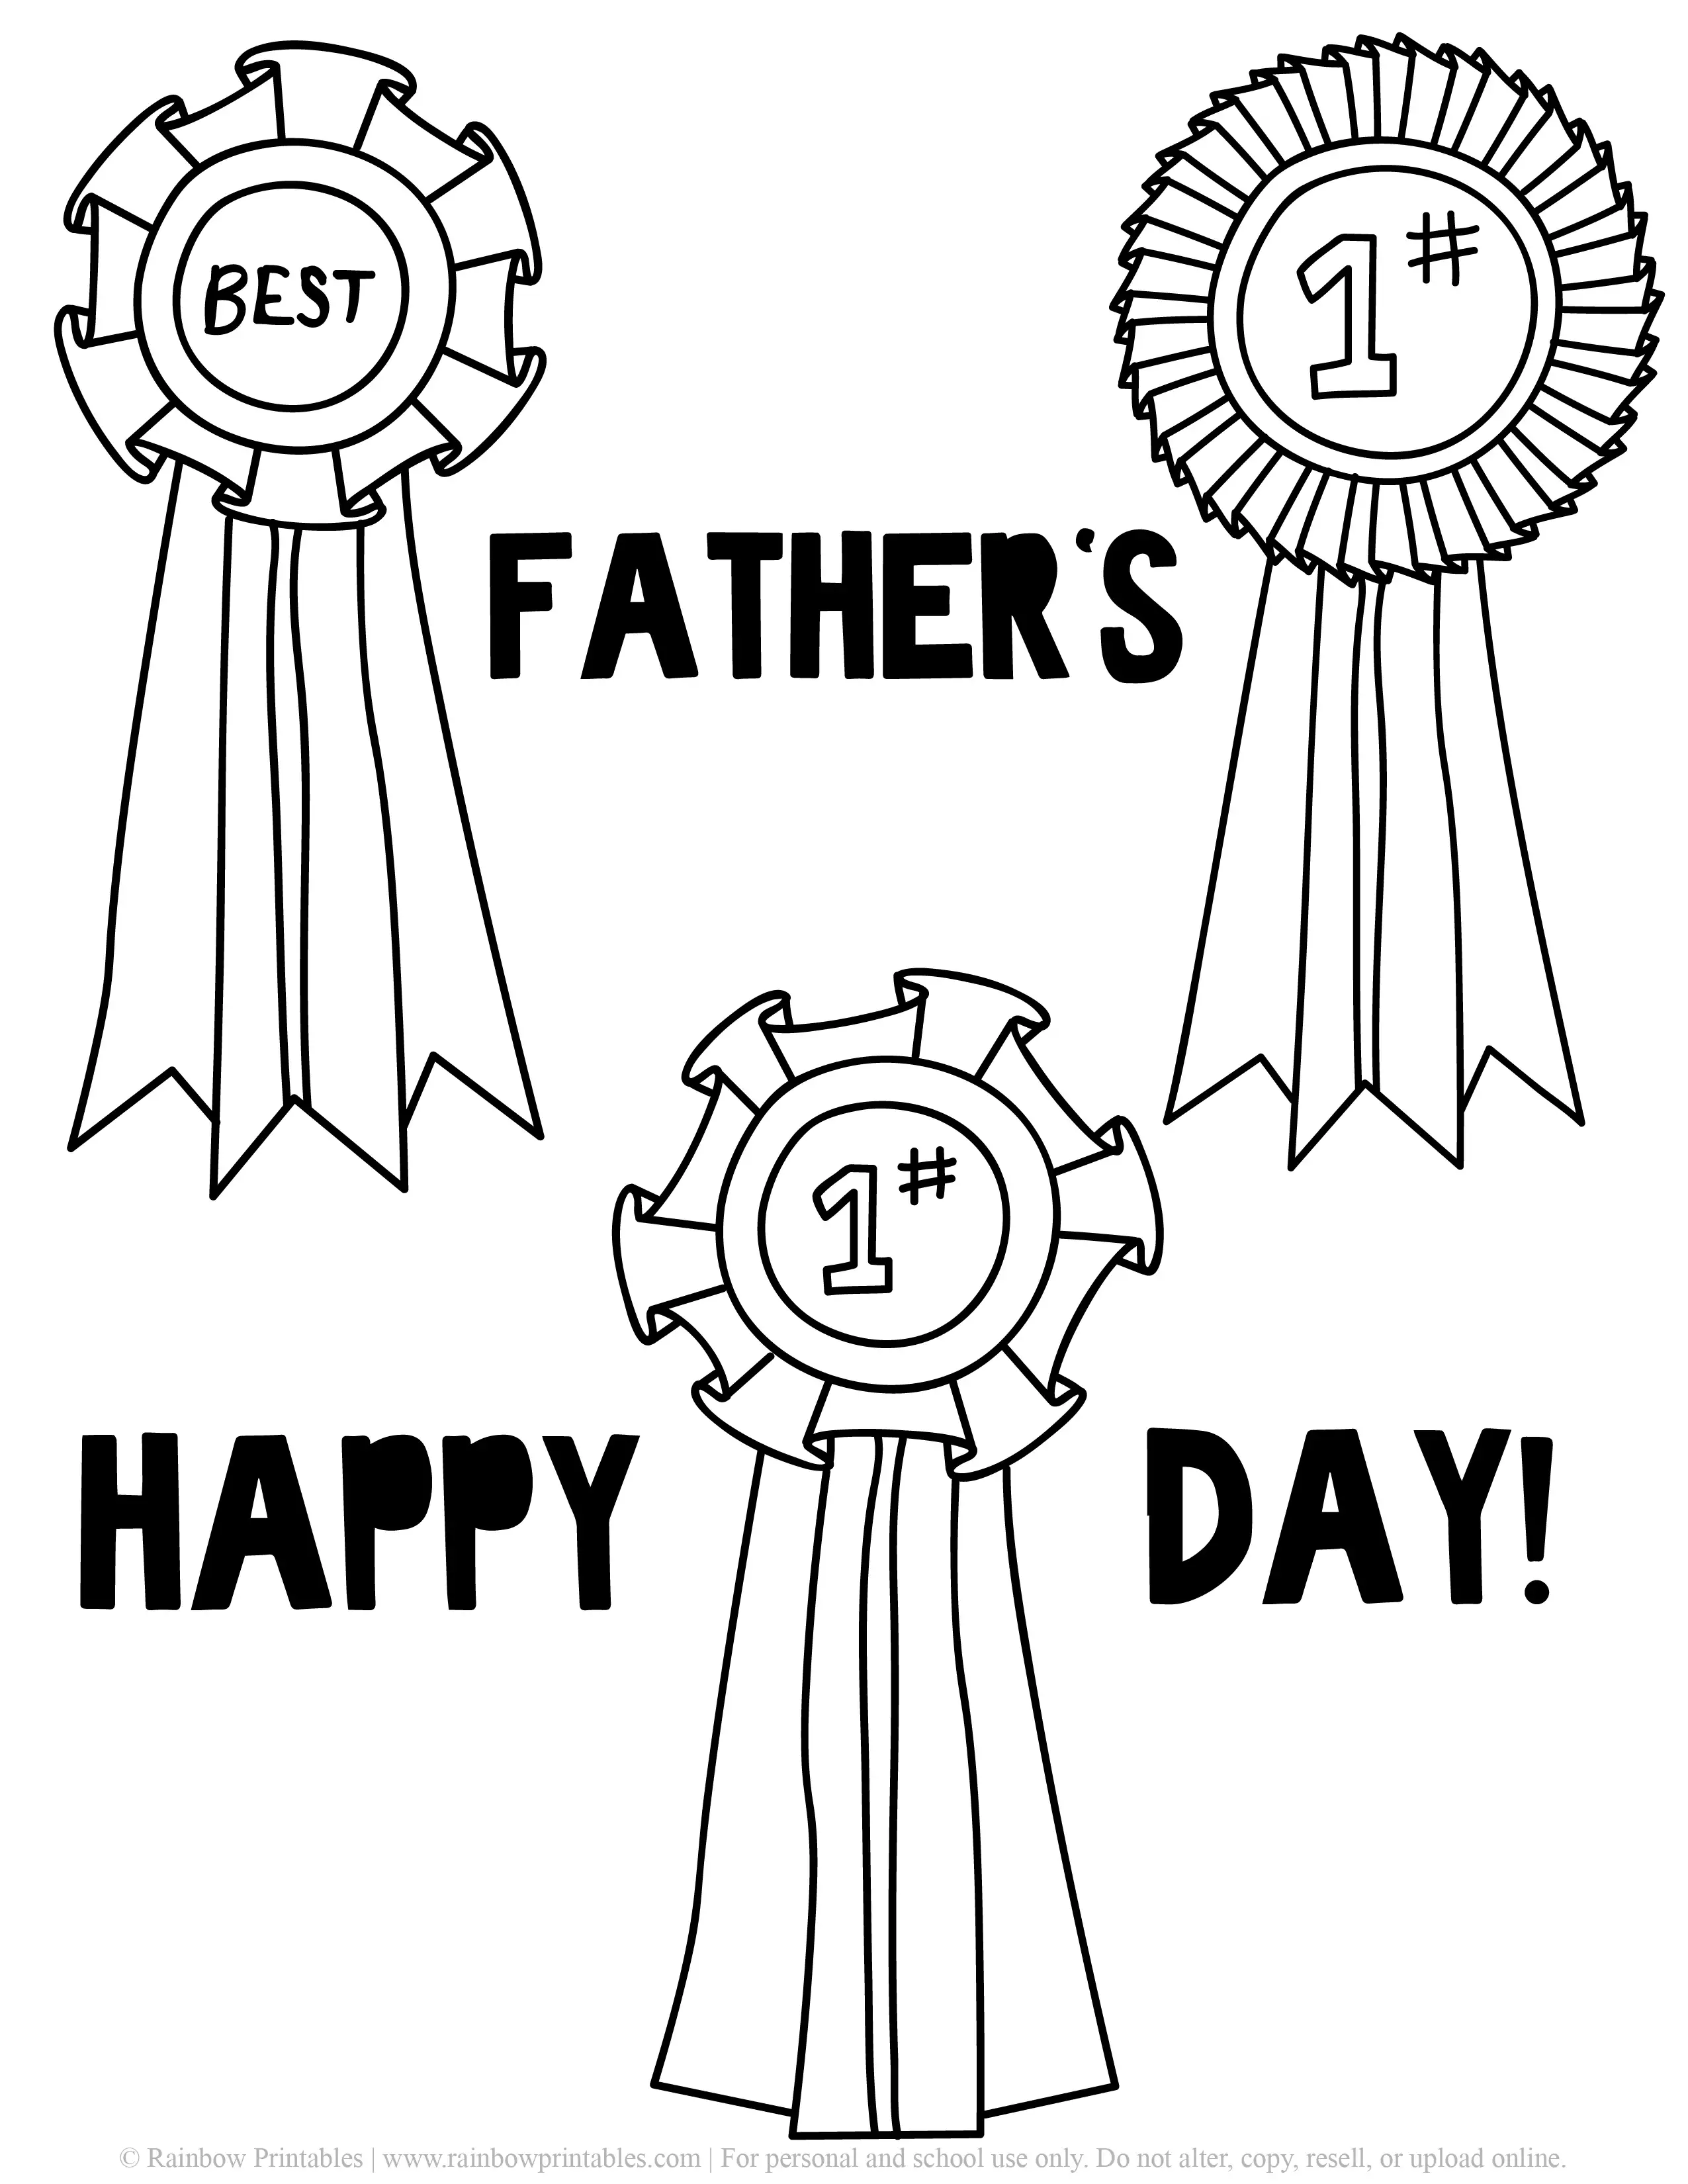 Father's Day Punny Cards & Coloring Pages Number 1 Dad AWARD RIBBONS BEST Happy Father's Day First Place Printable